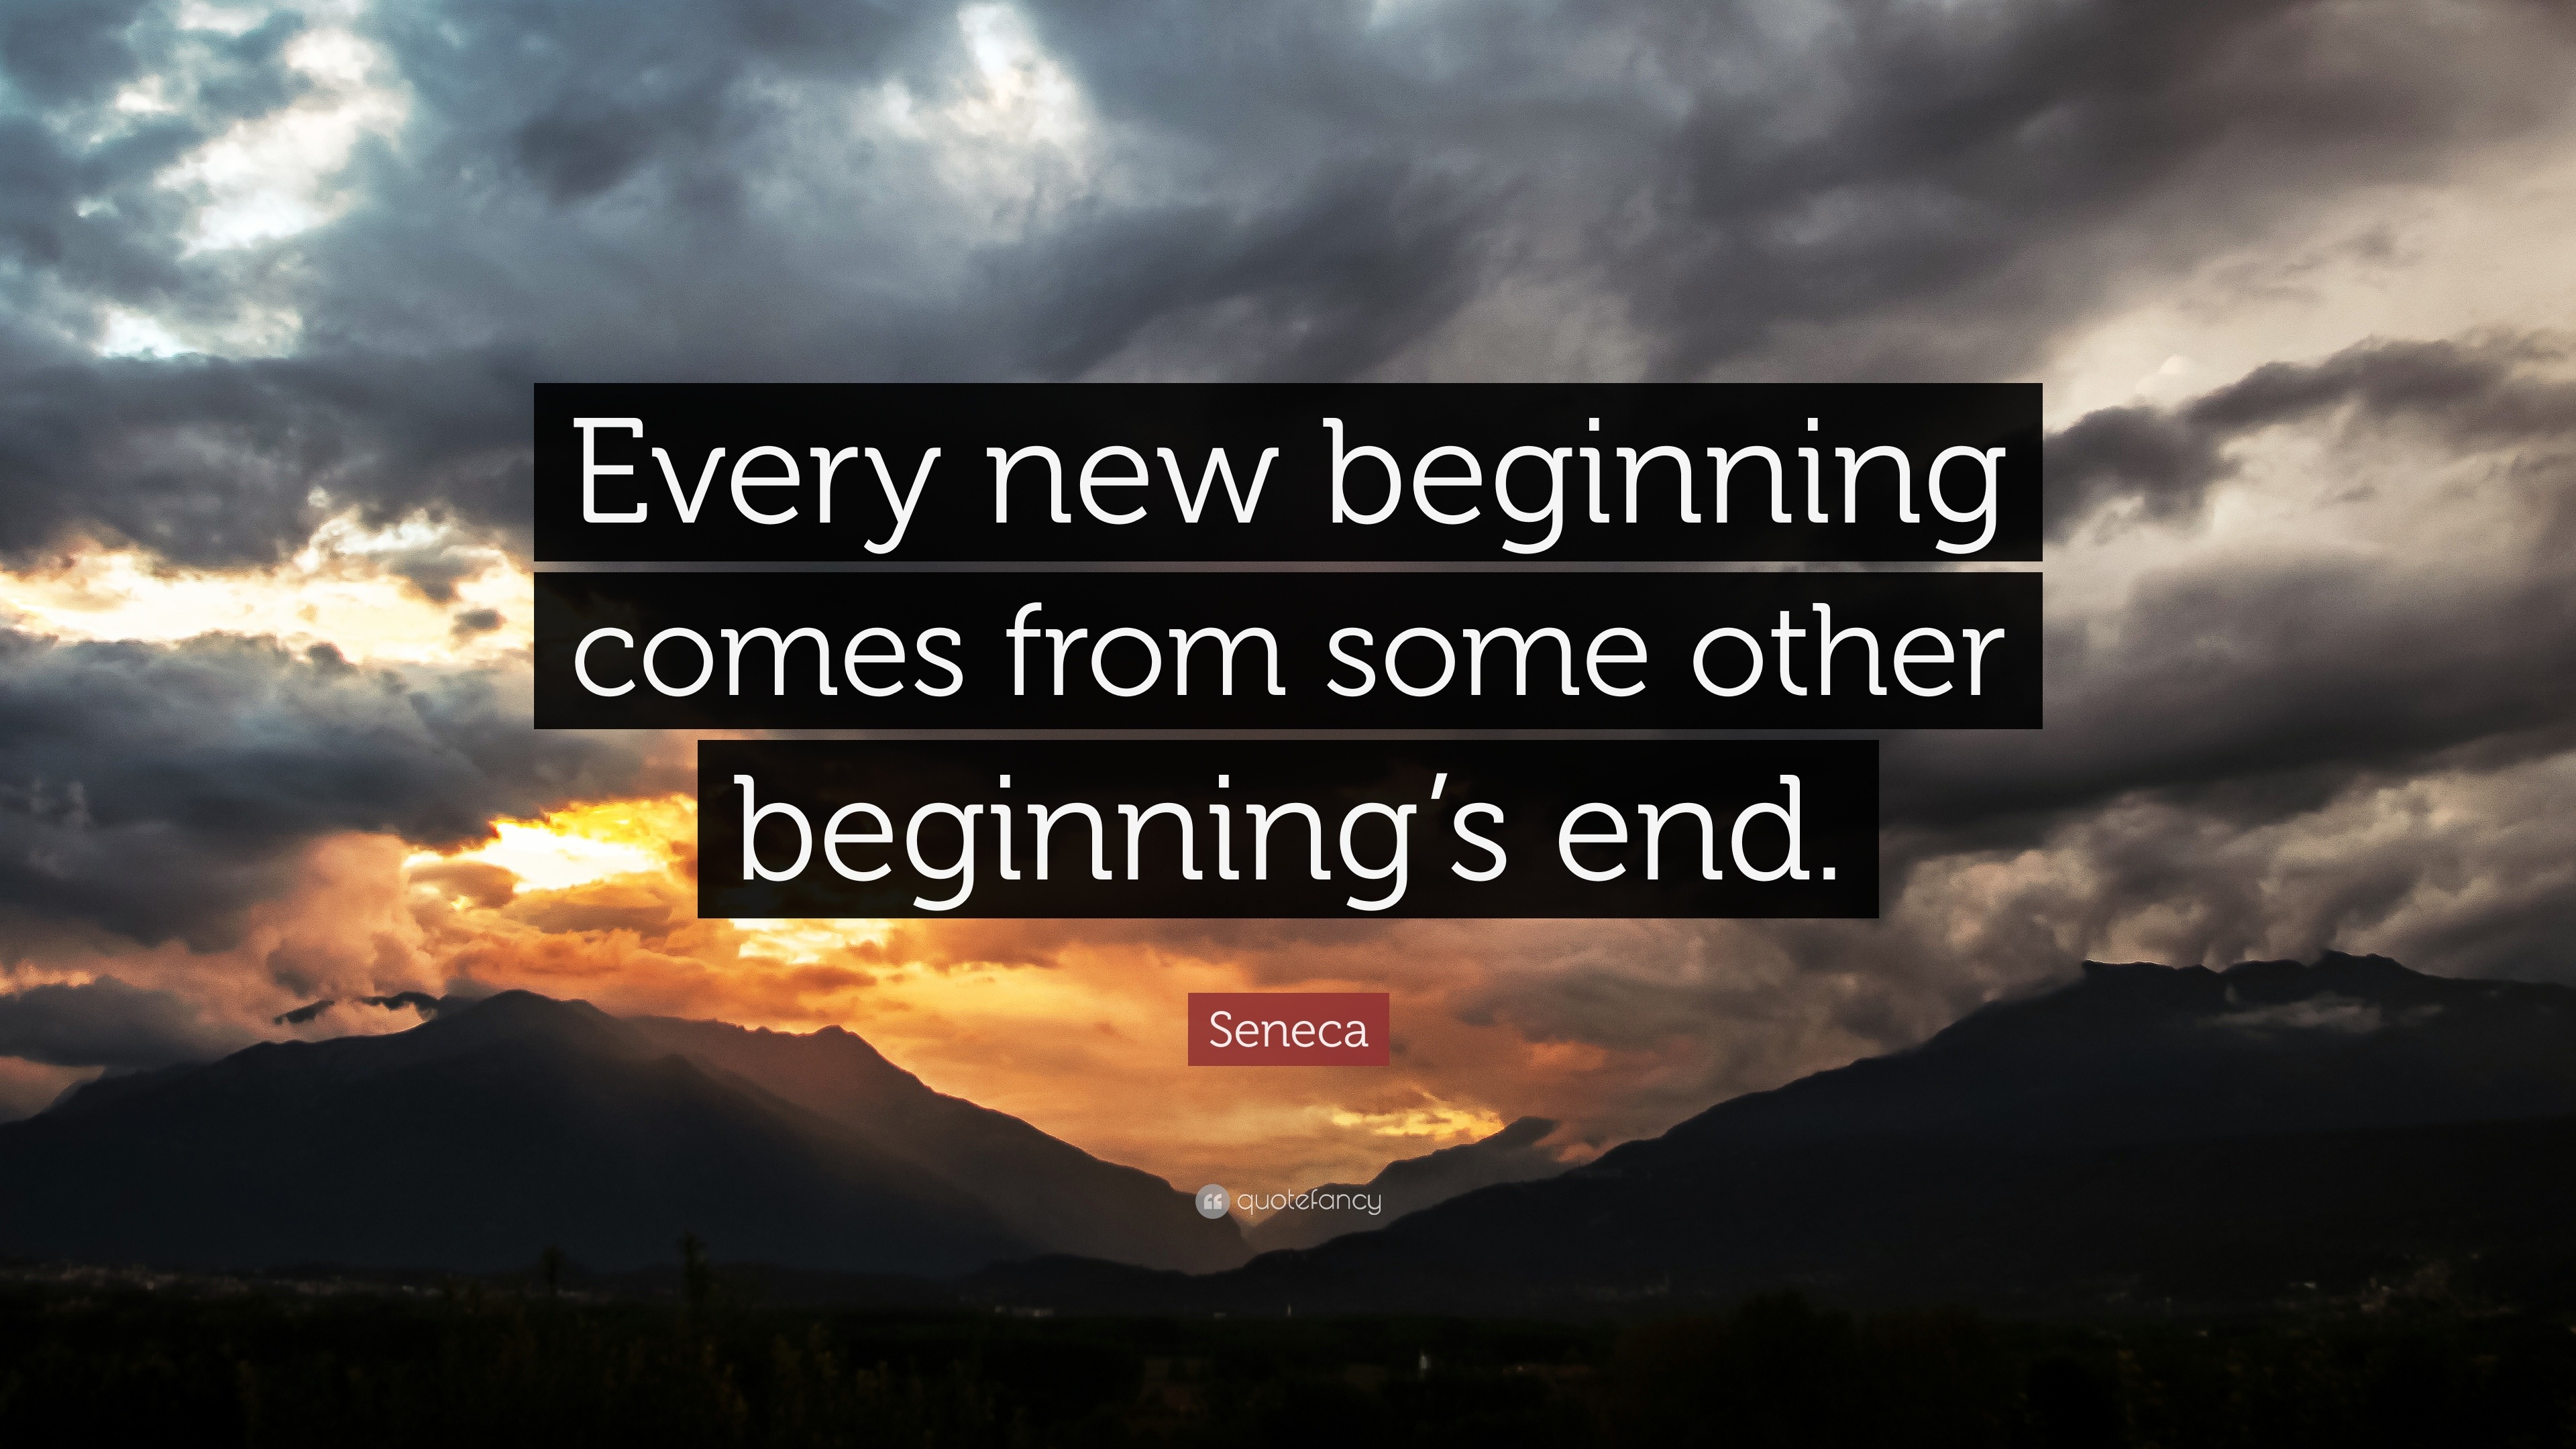 Seneca Quote: “Every new beginning comes from some other beginning's end.”